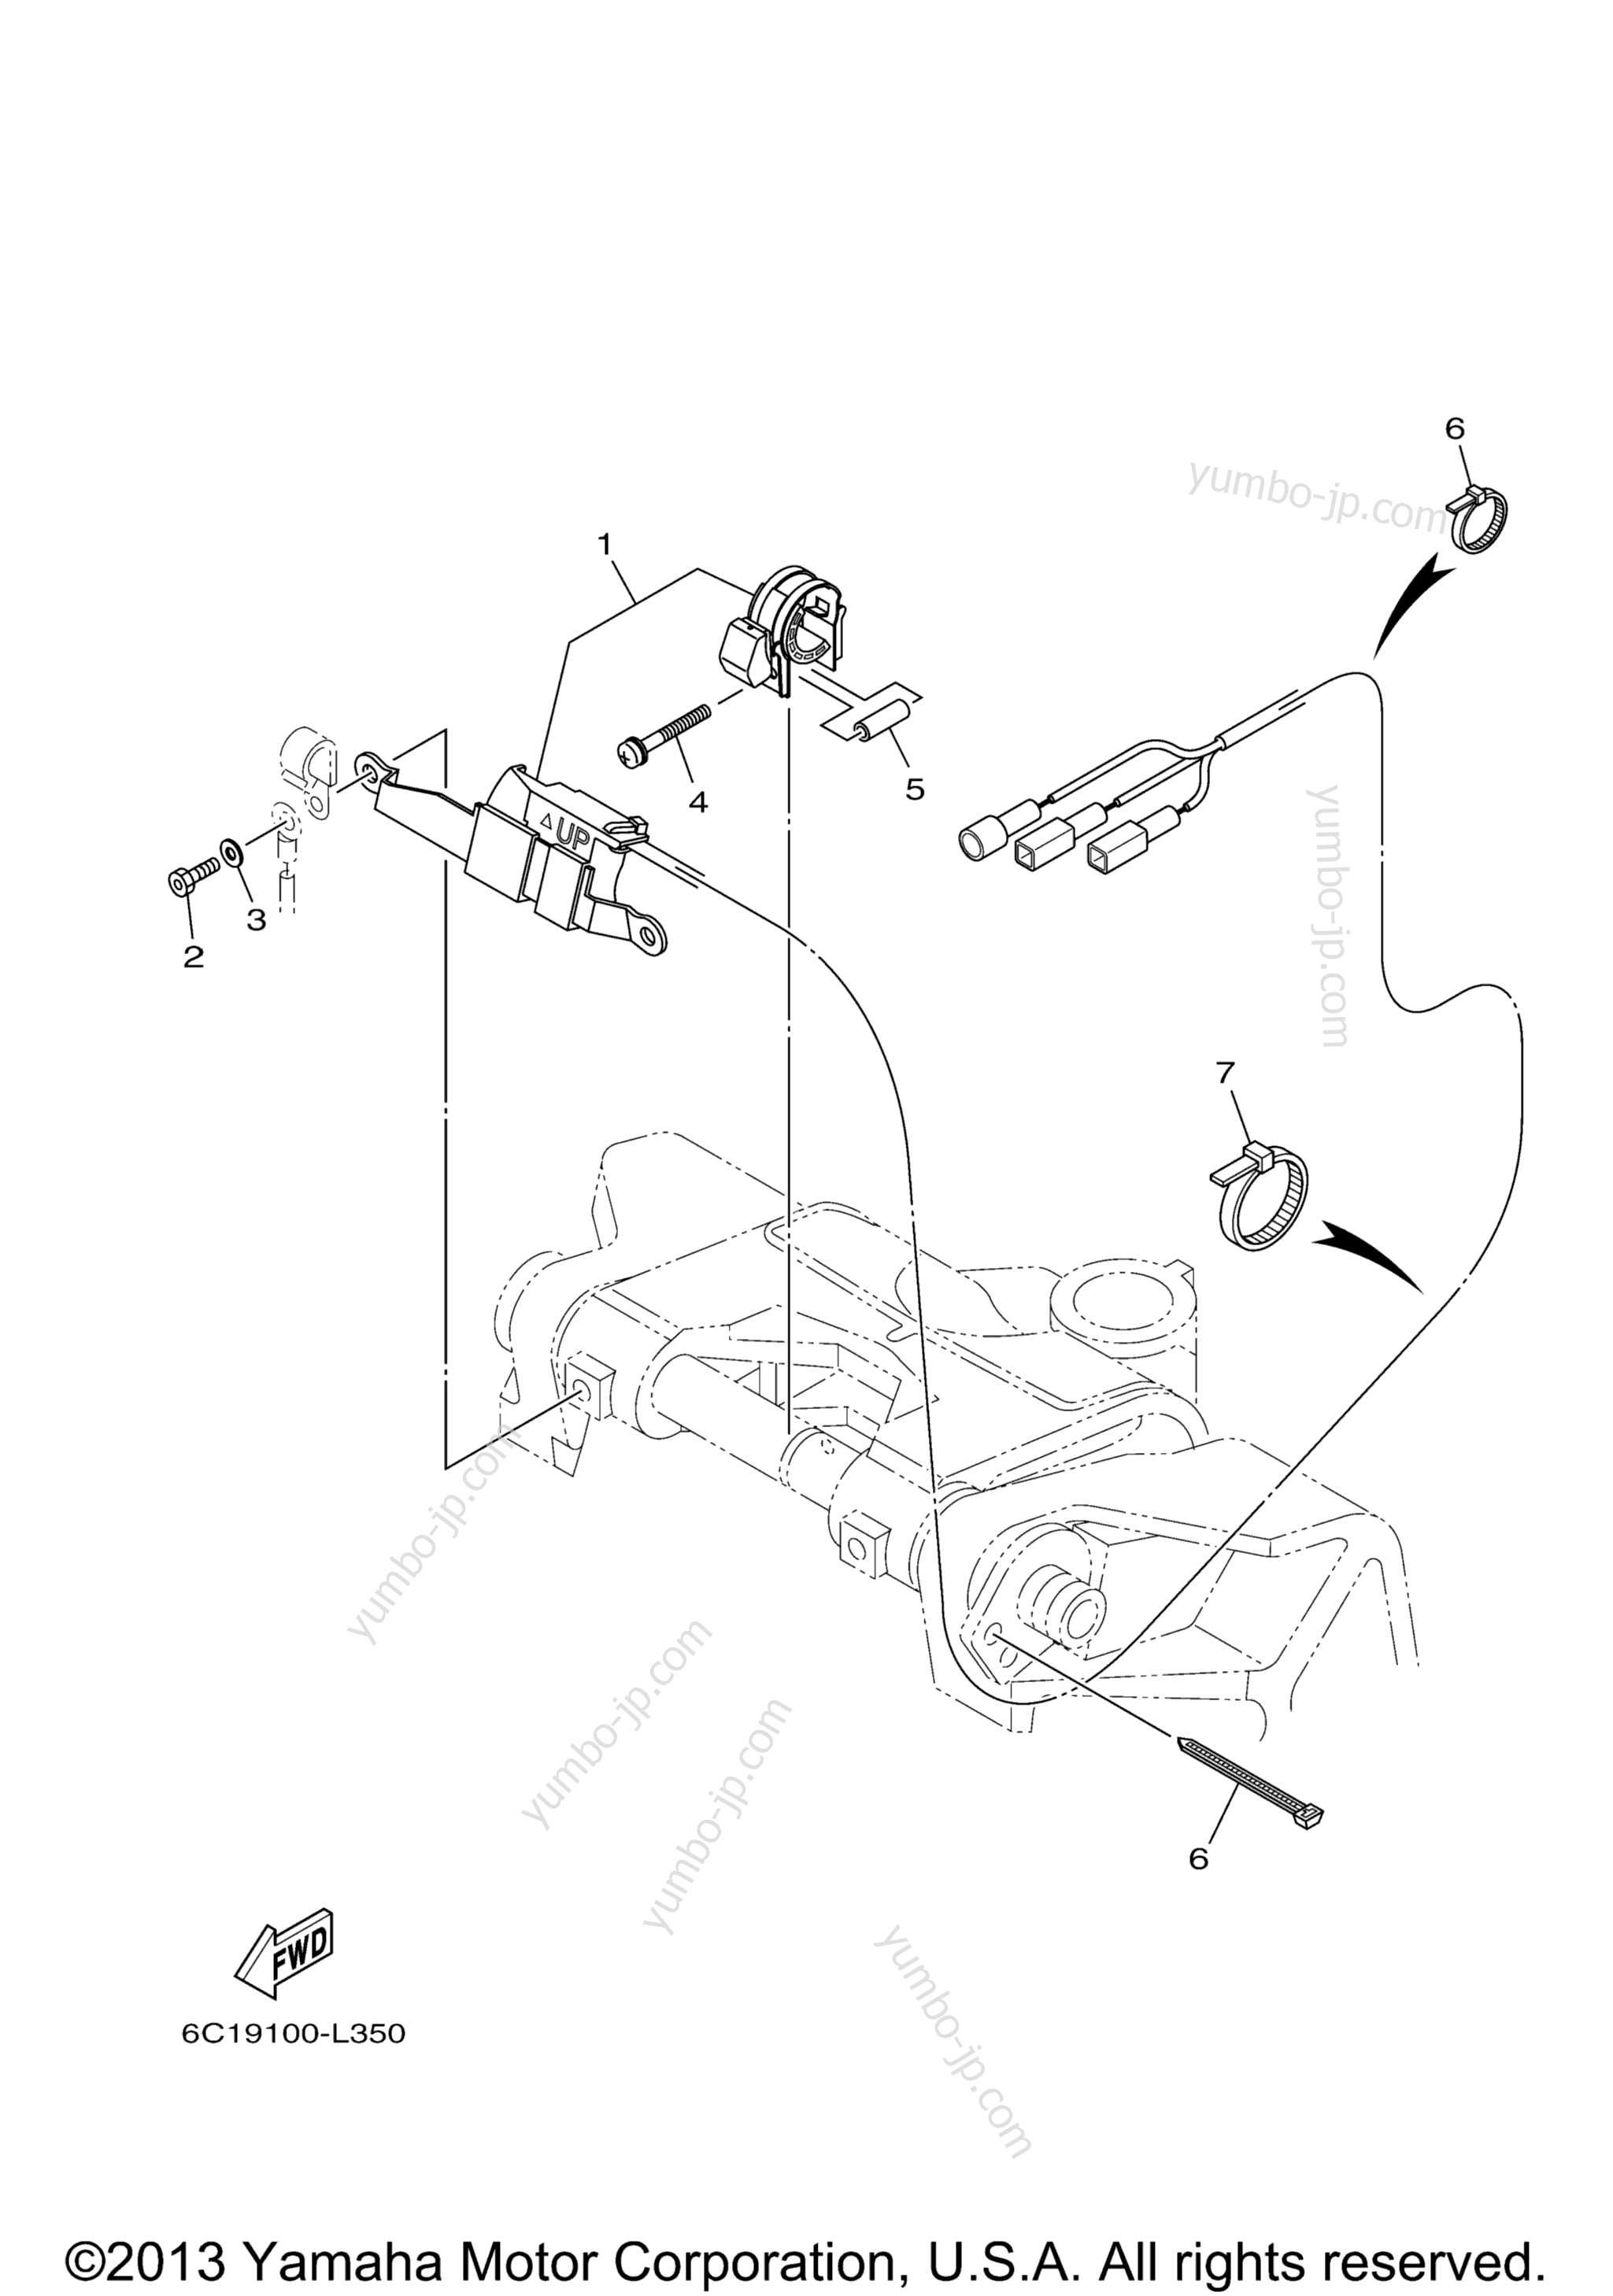 Optional Parts 2 for outboards YAMAHA F60JA_0112 (0112) 2006 year